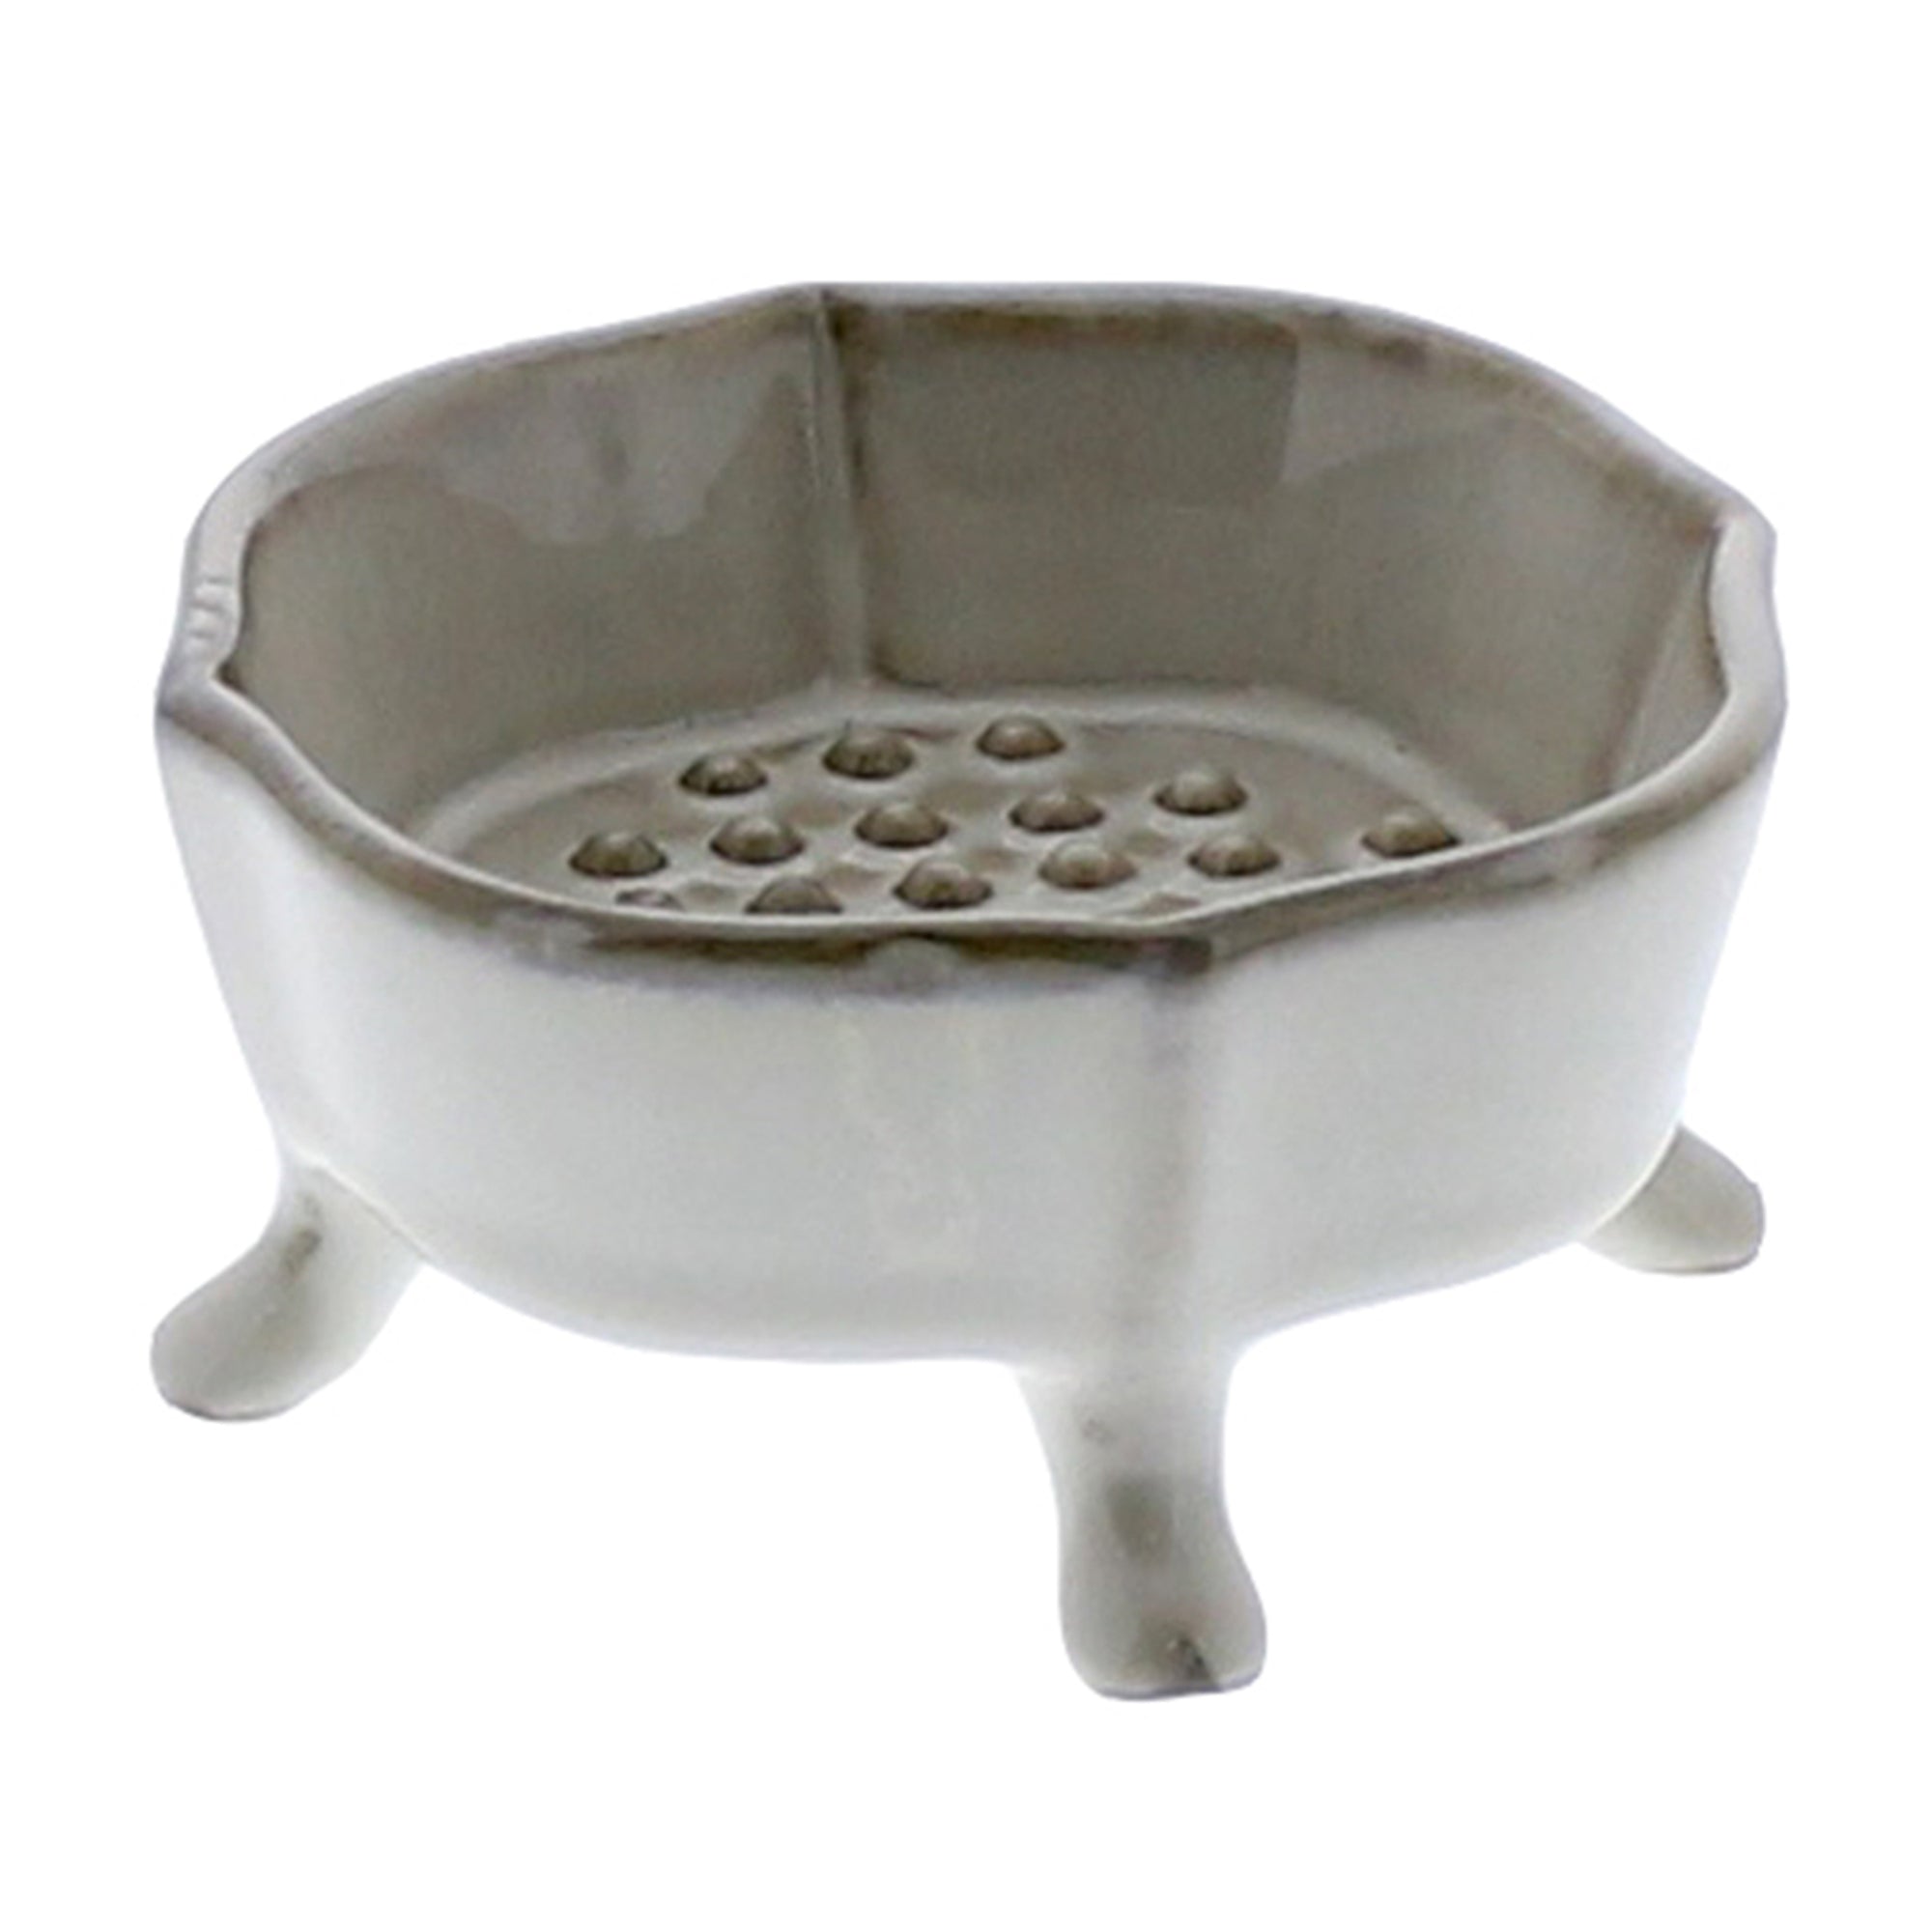 Ceramic Rue Footed Soap Dish